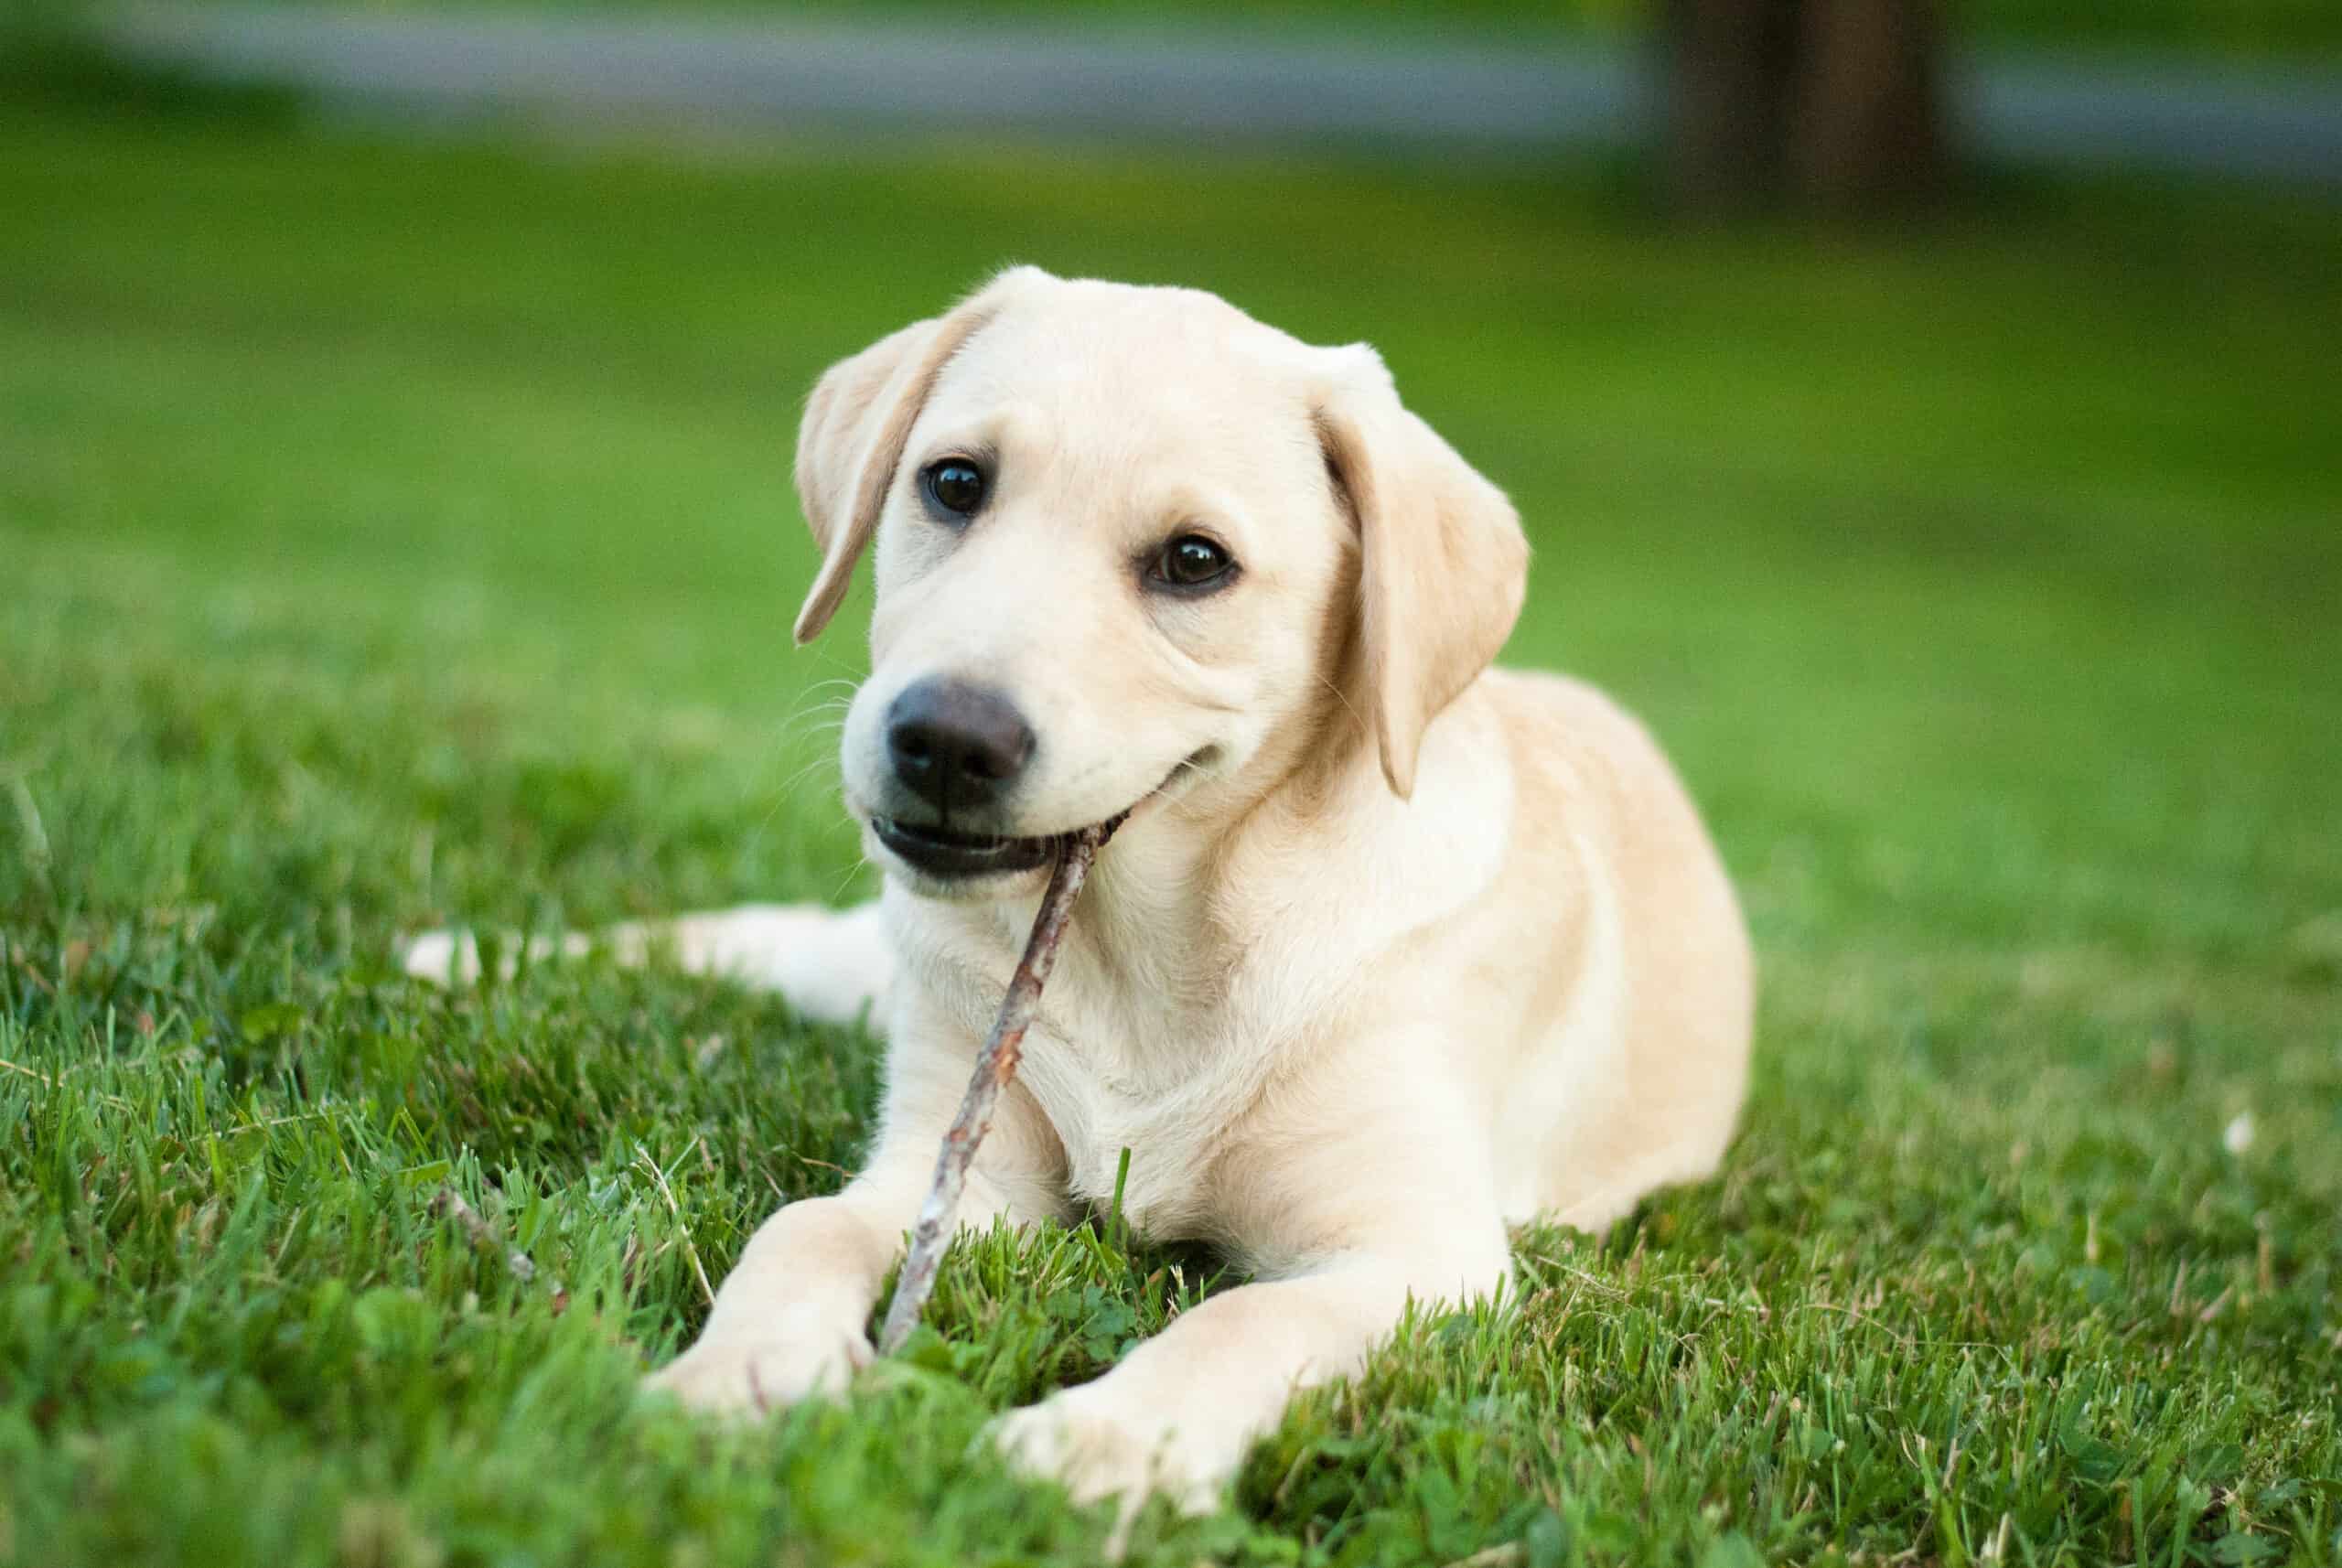 When do puppies stop teething?